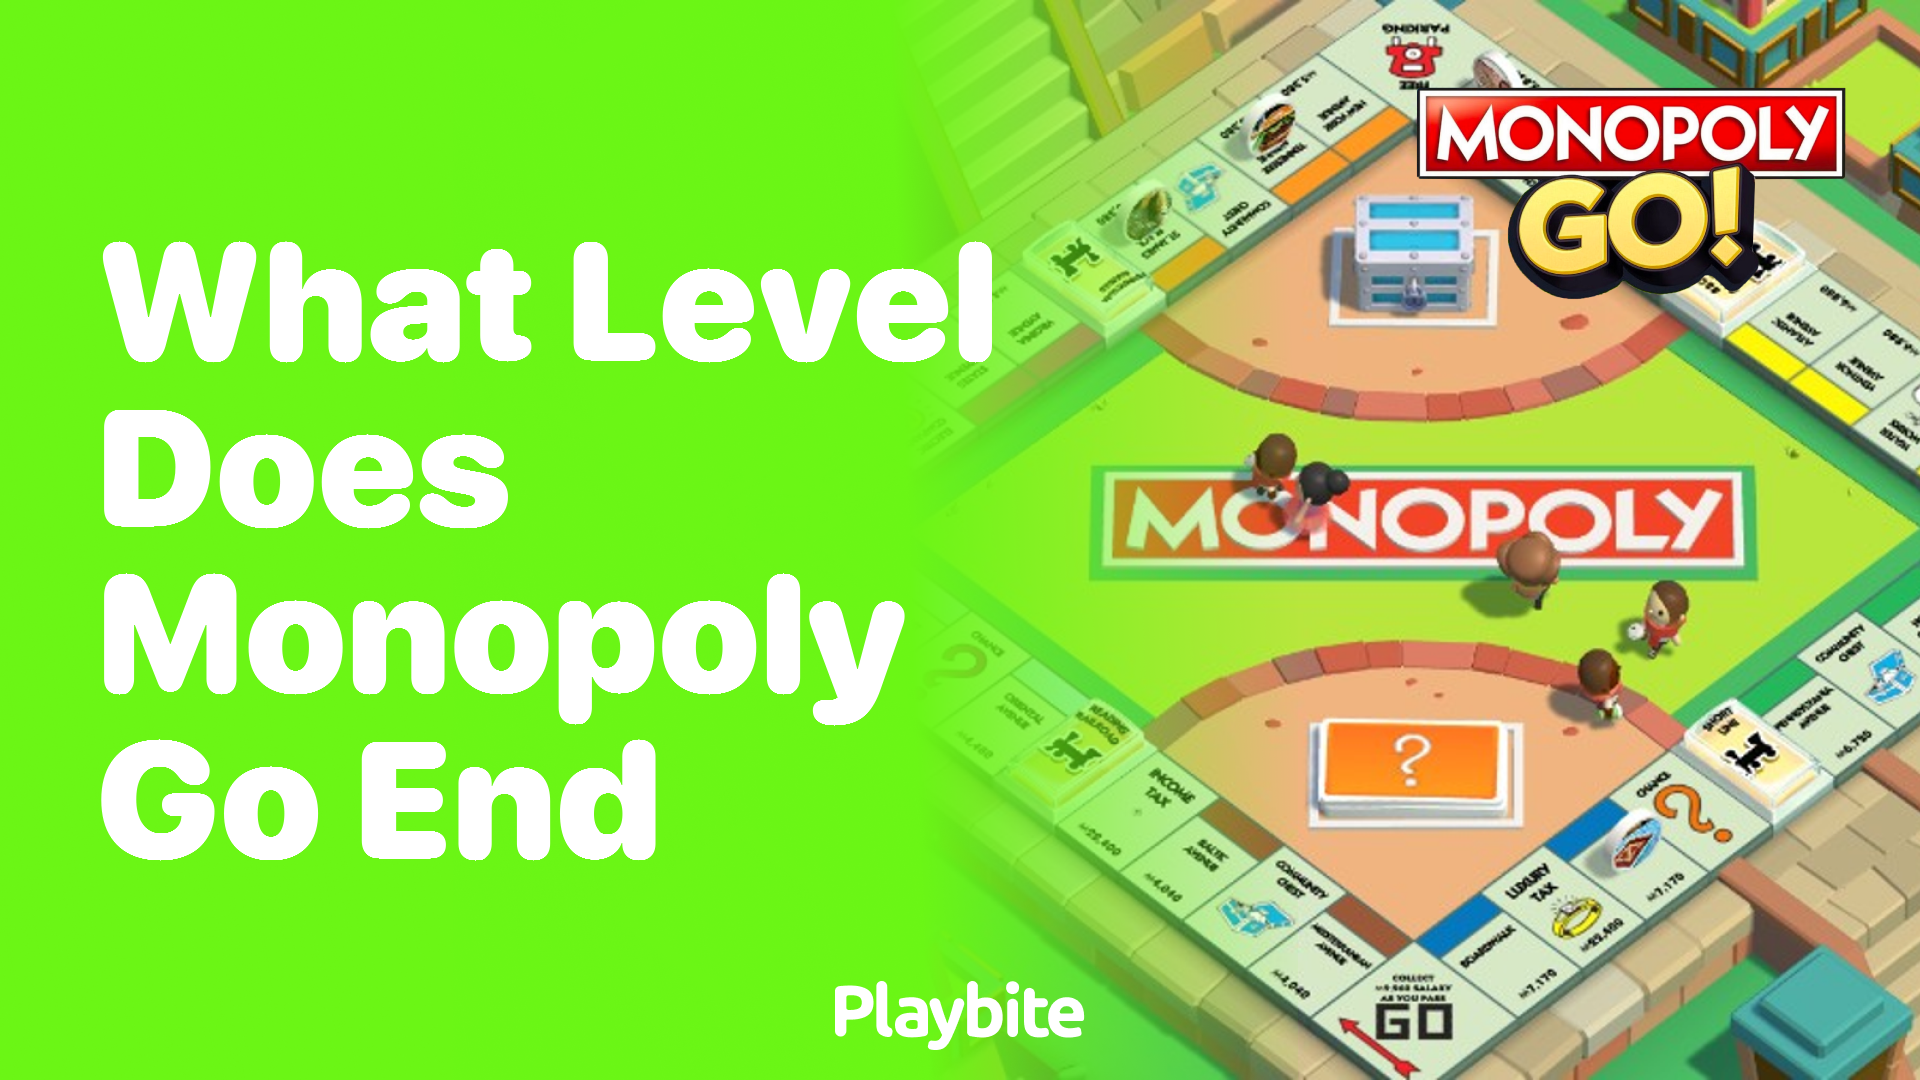 What Level Does Monopoly Go End?